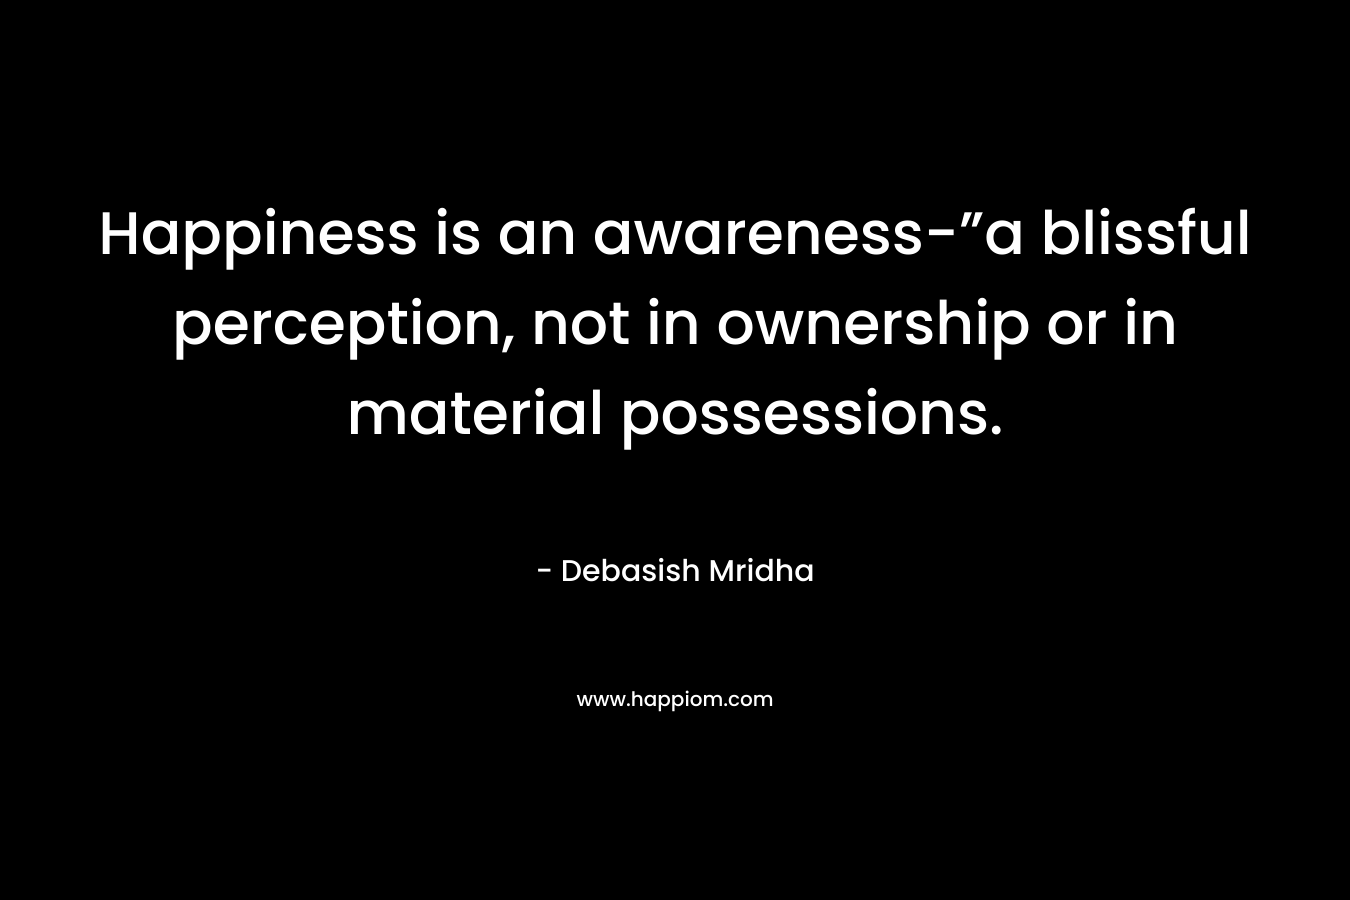 Happiness is an awareness-”a blissful perception, not in ownership or in material possessions. – Debasish Mridha